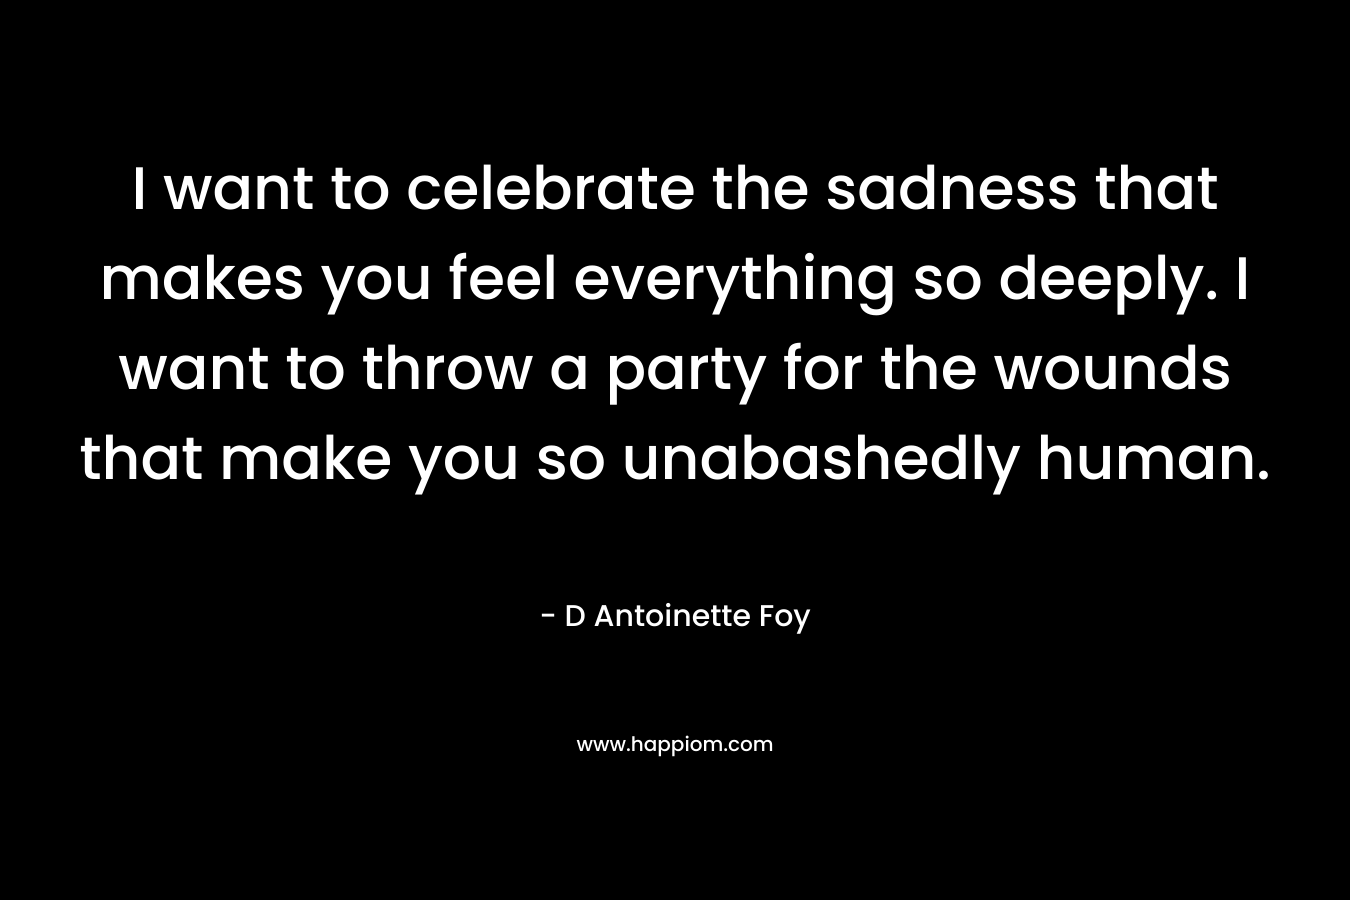 I want to celebrate the sadness that makes you feel everything so deeply. I want to throw a party for the wounds that make you so unabashedly human. – D Antoinette Foy